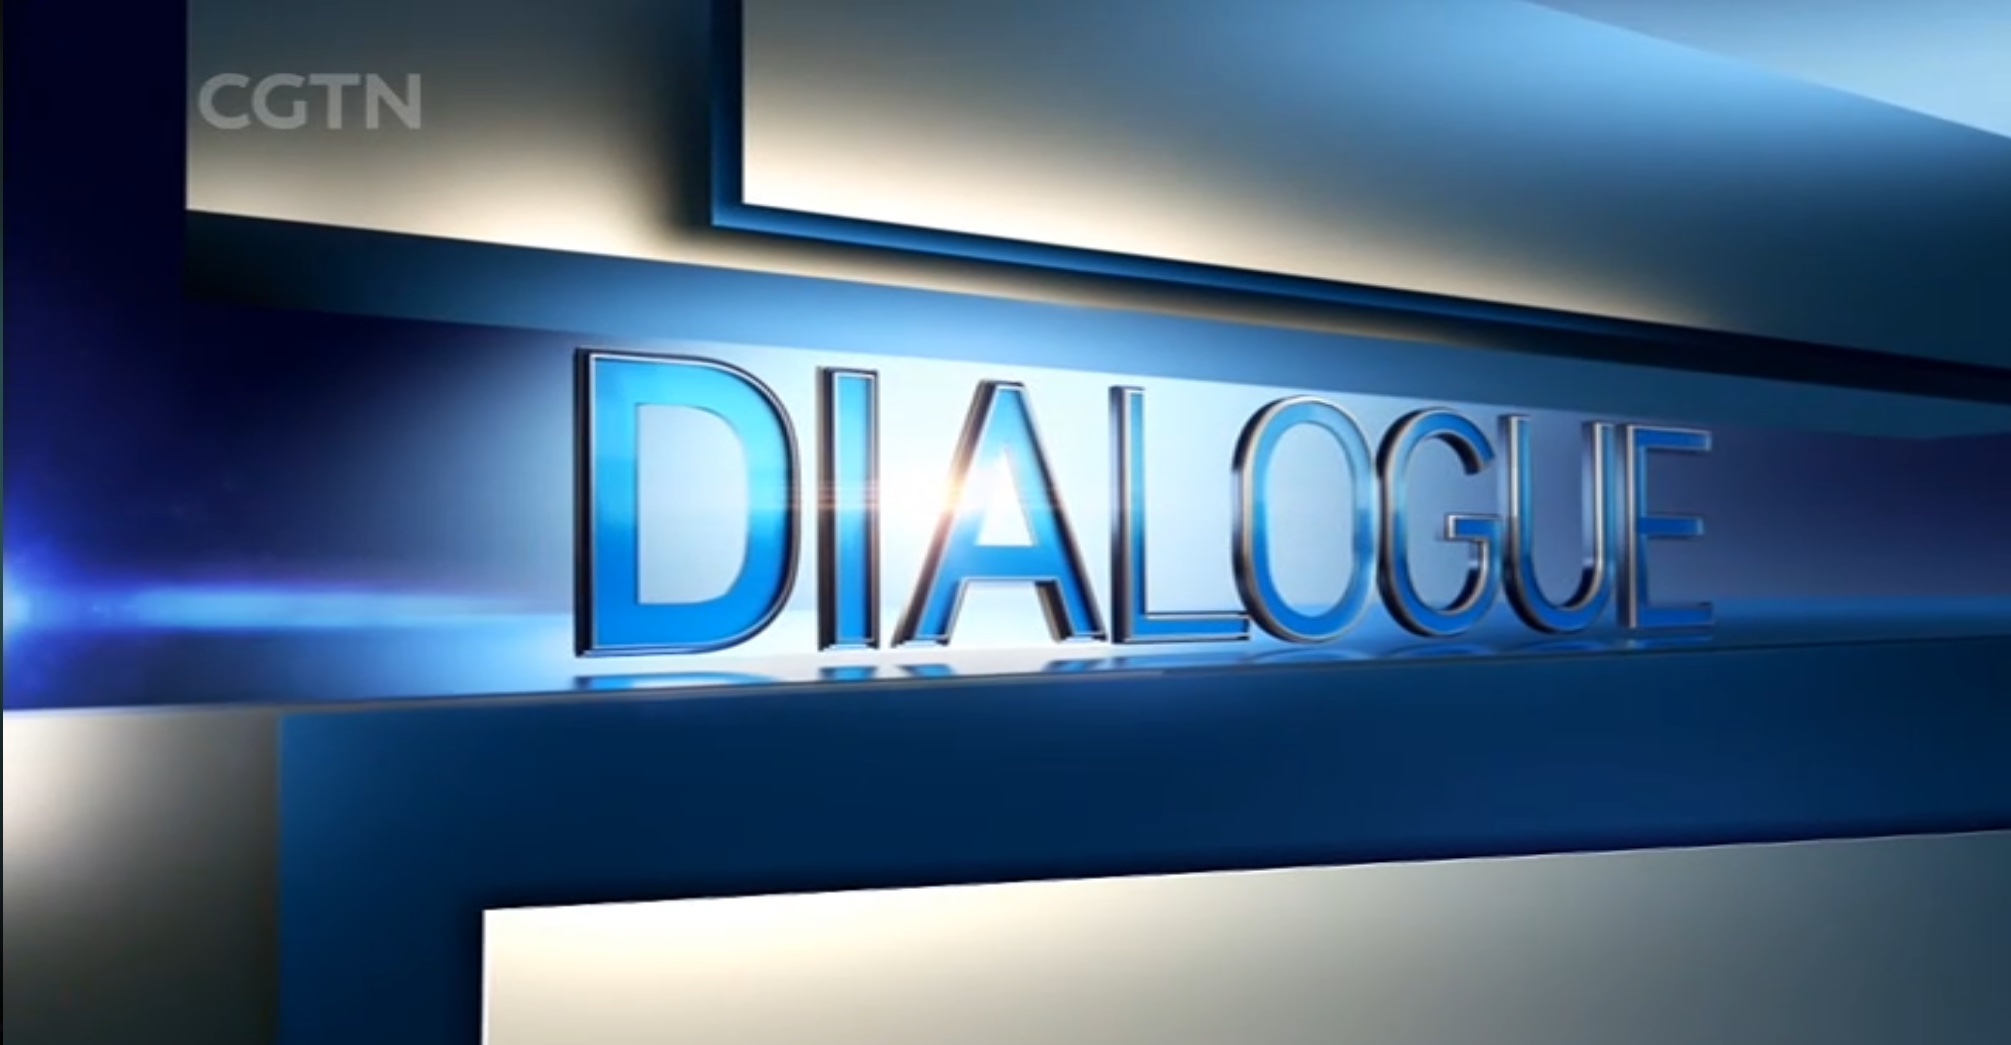 Read more about the article WATCH Today’s Episode of CGTN’s Program DIALOGUE